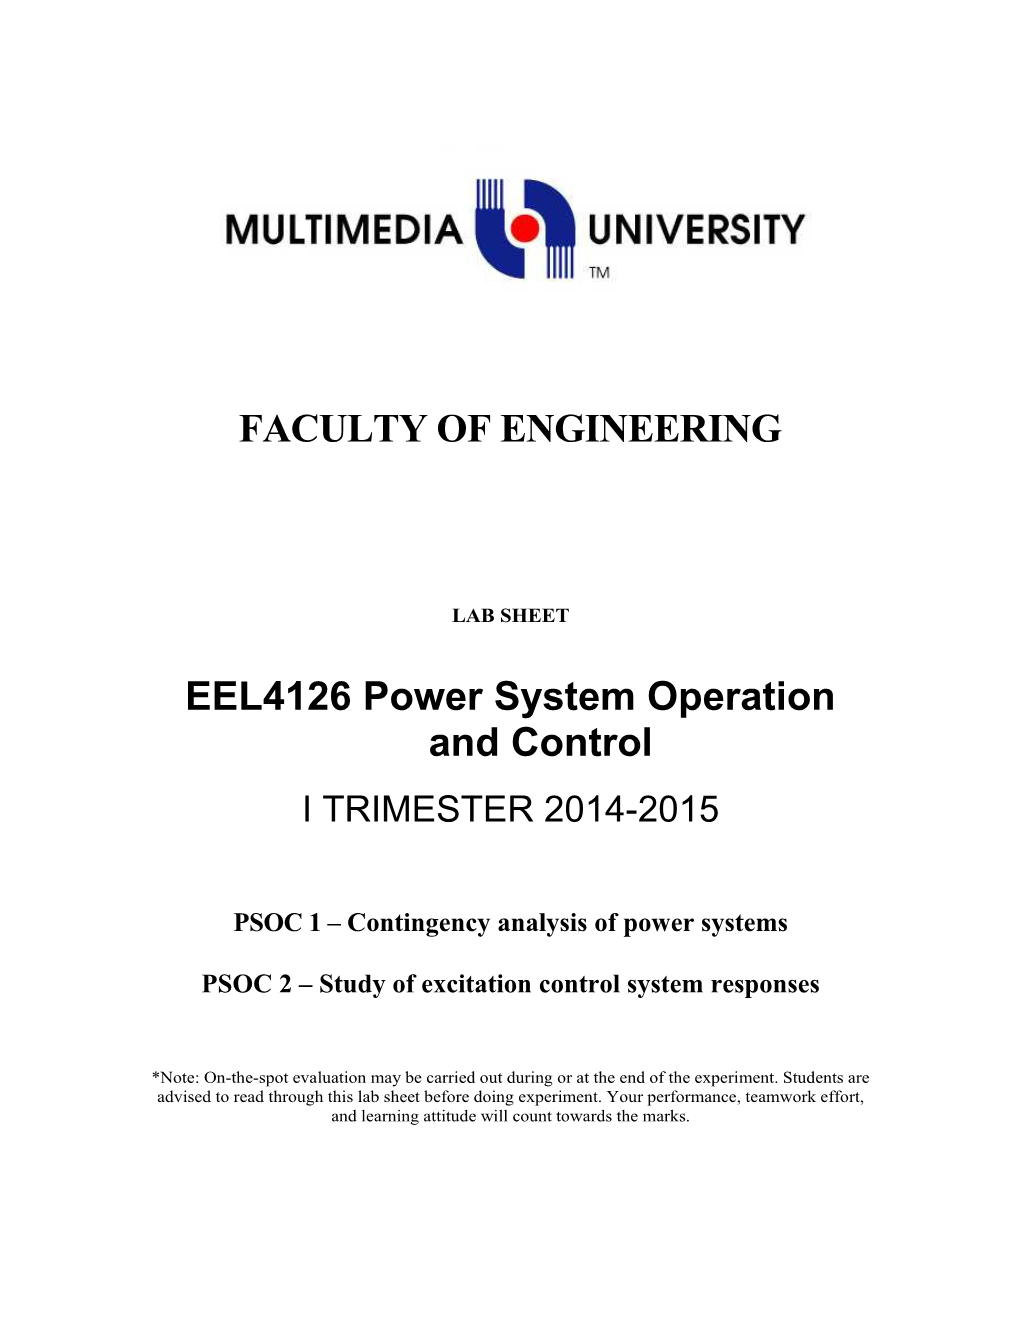 EEL4126 Power System Operation and Control